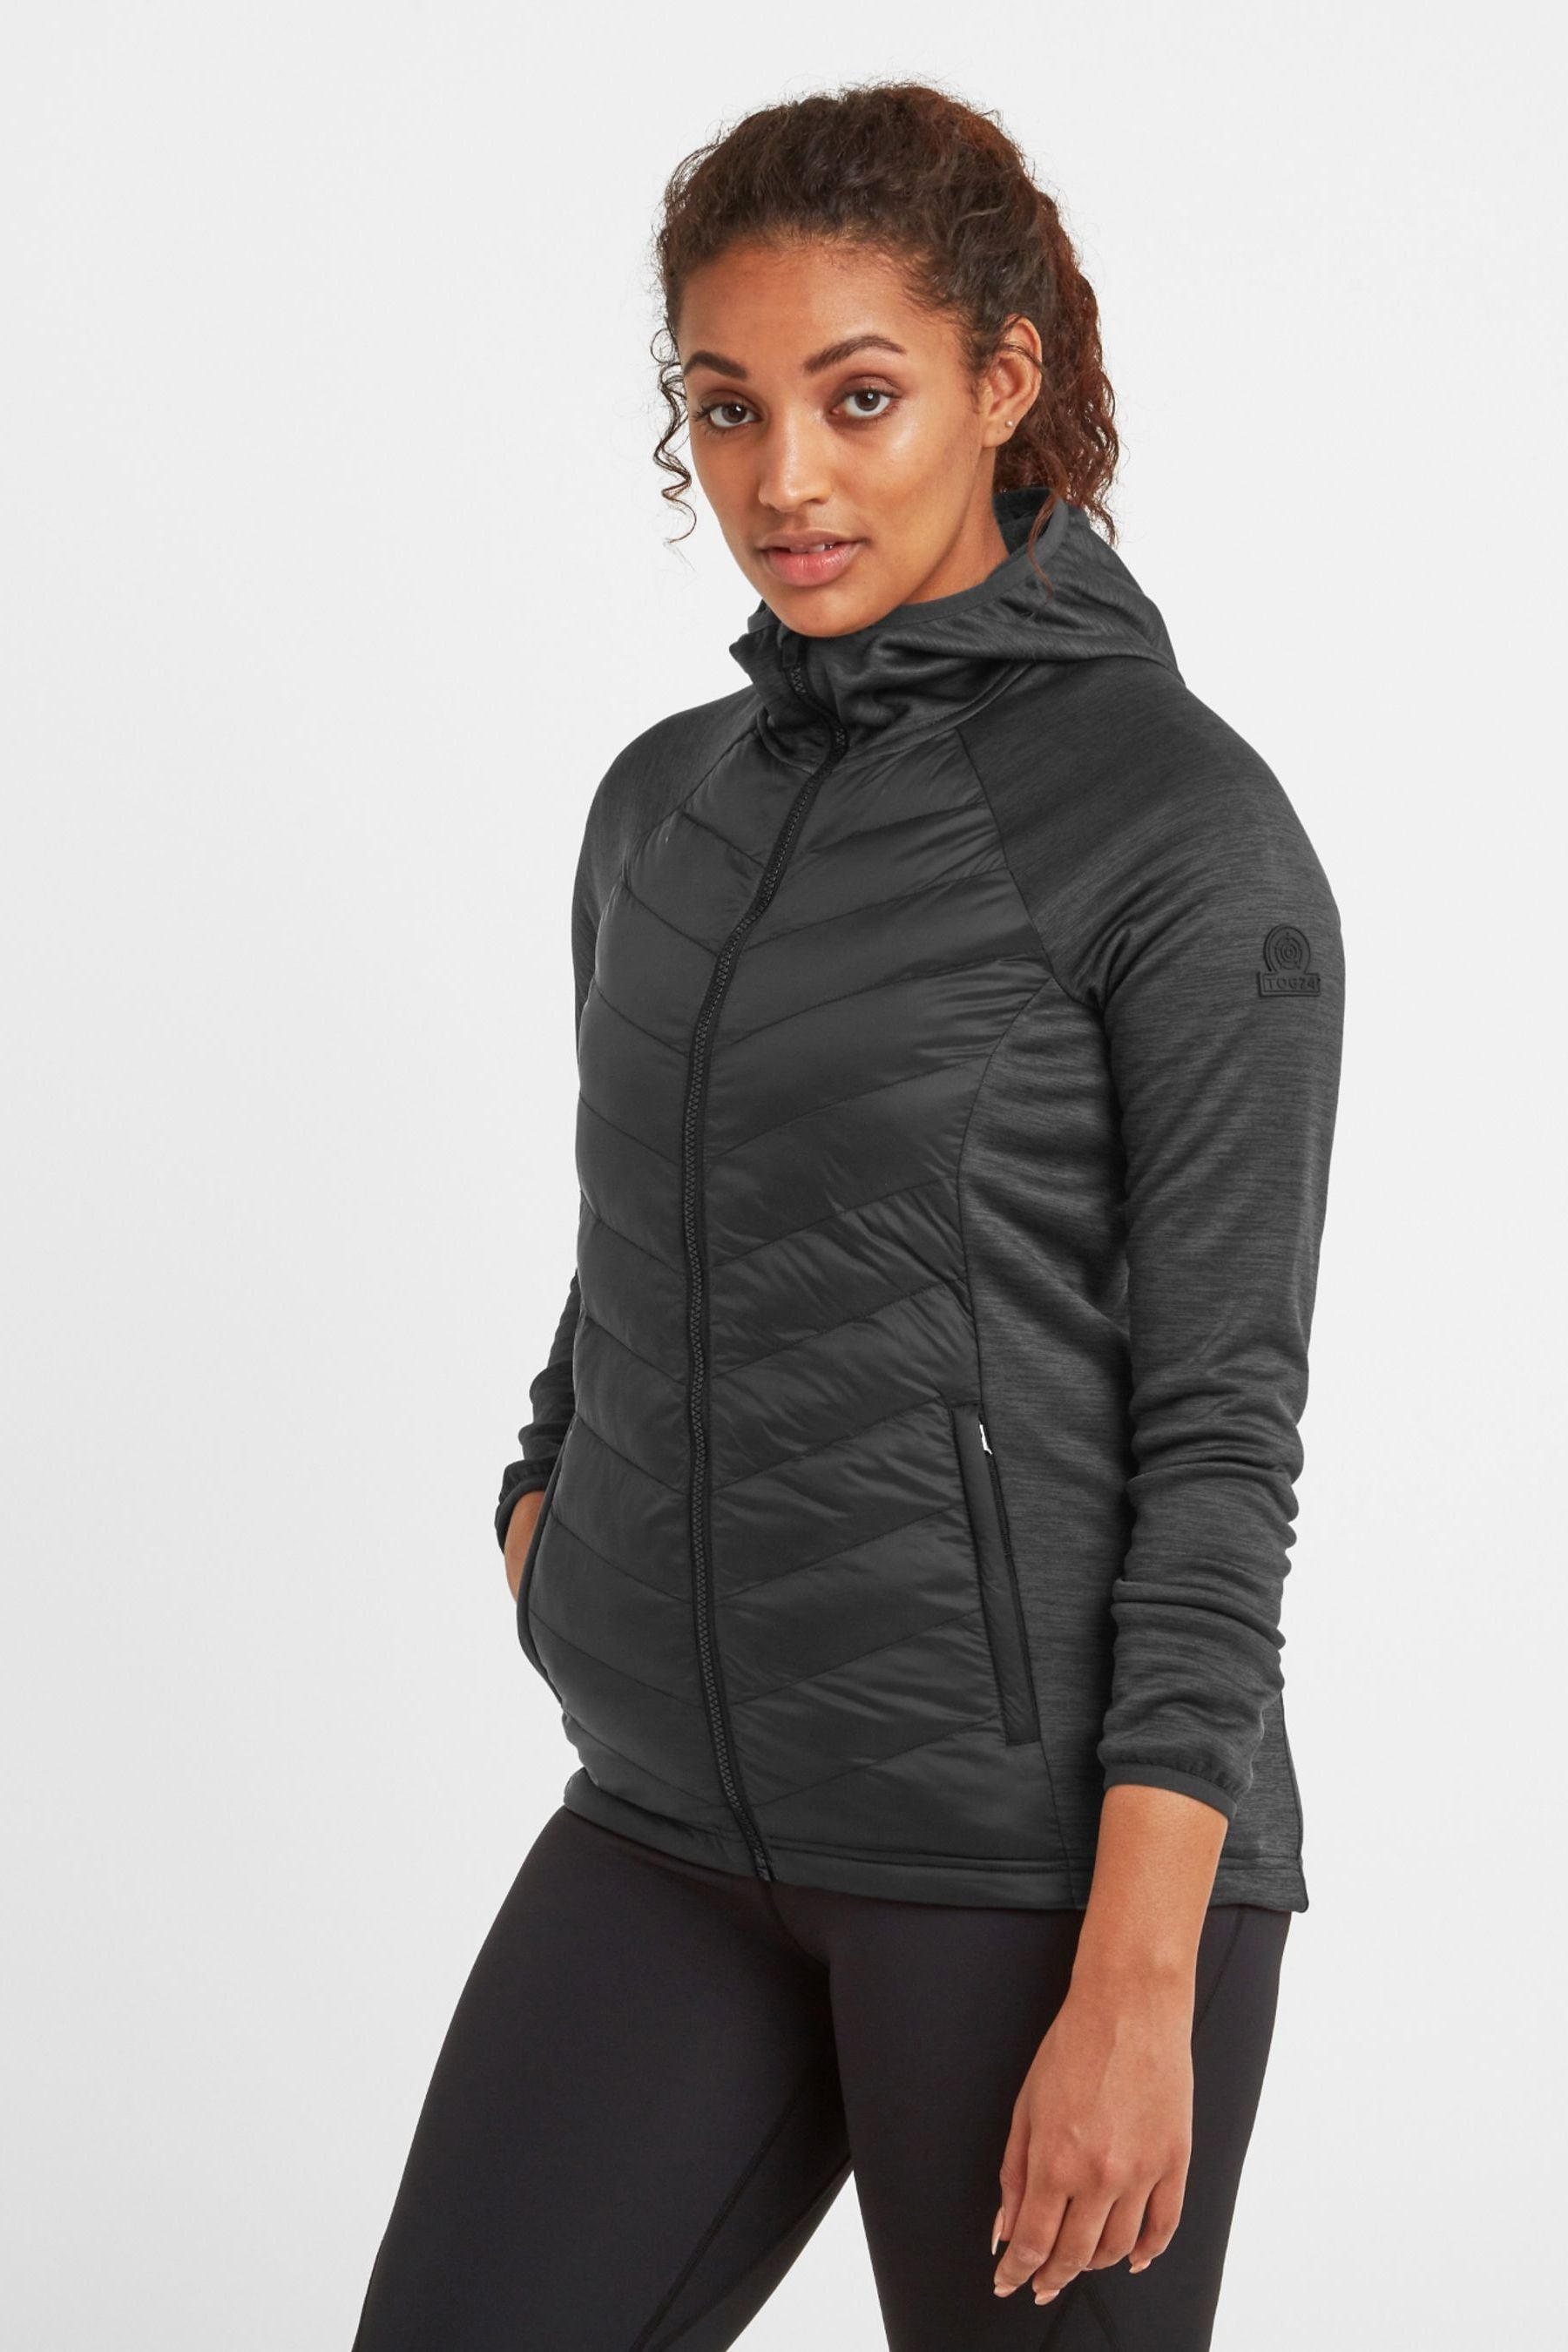 Buy Tog 24 Black Adwell Womens Hybrid Jacket from the Next UK online shop